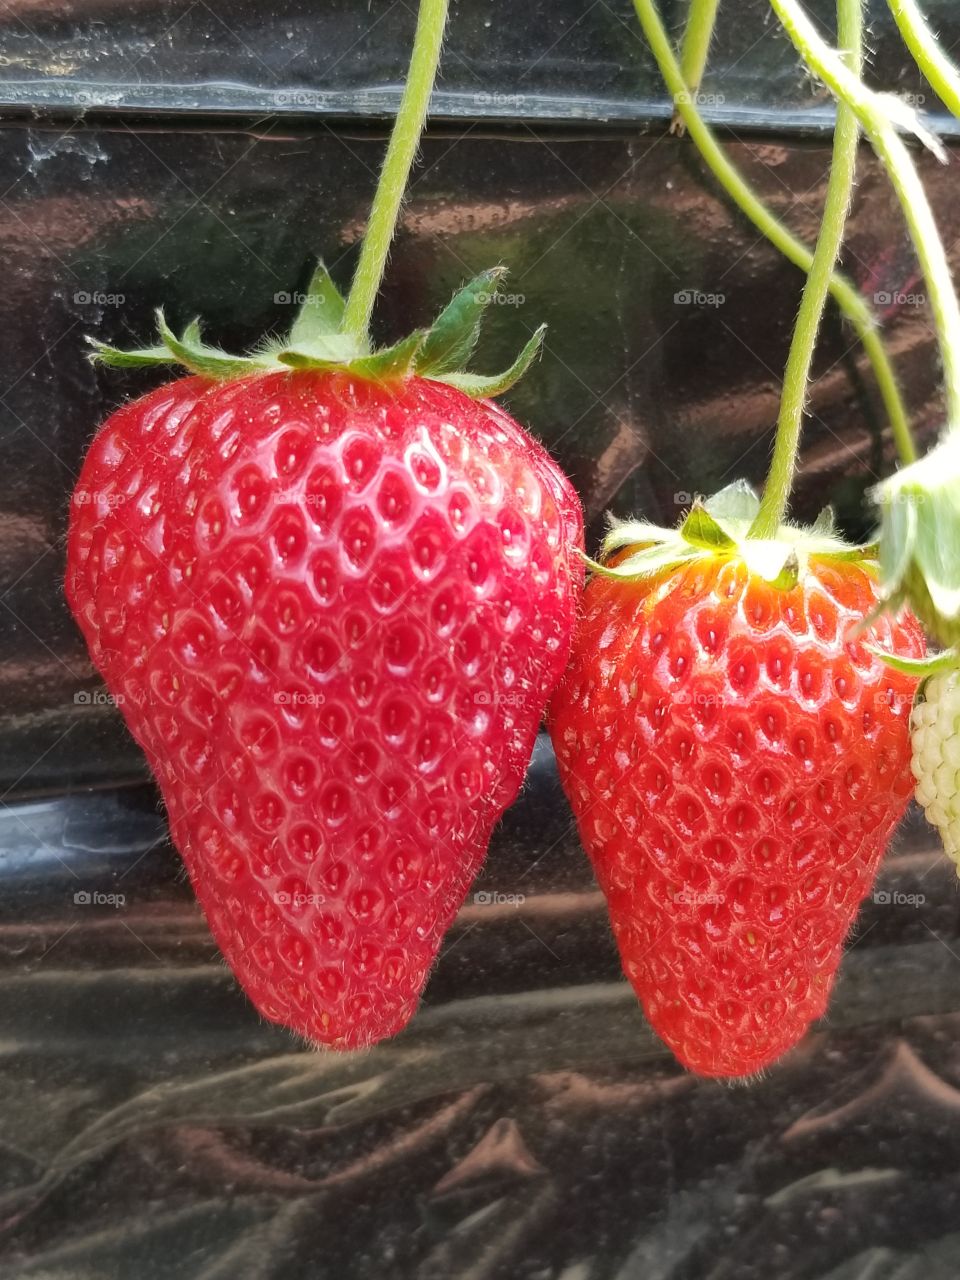 delicious looking strawberry